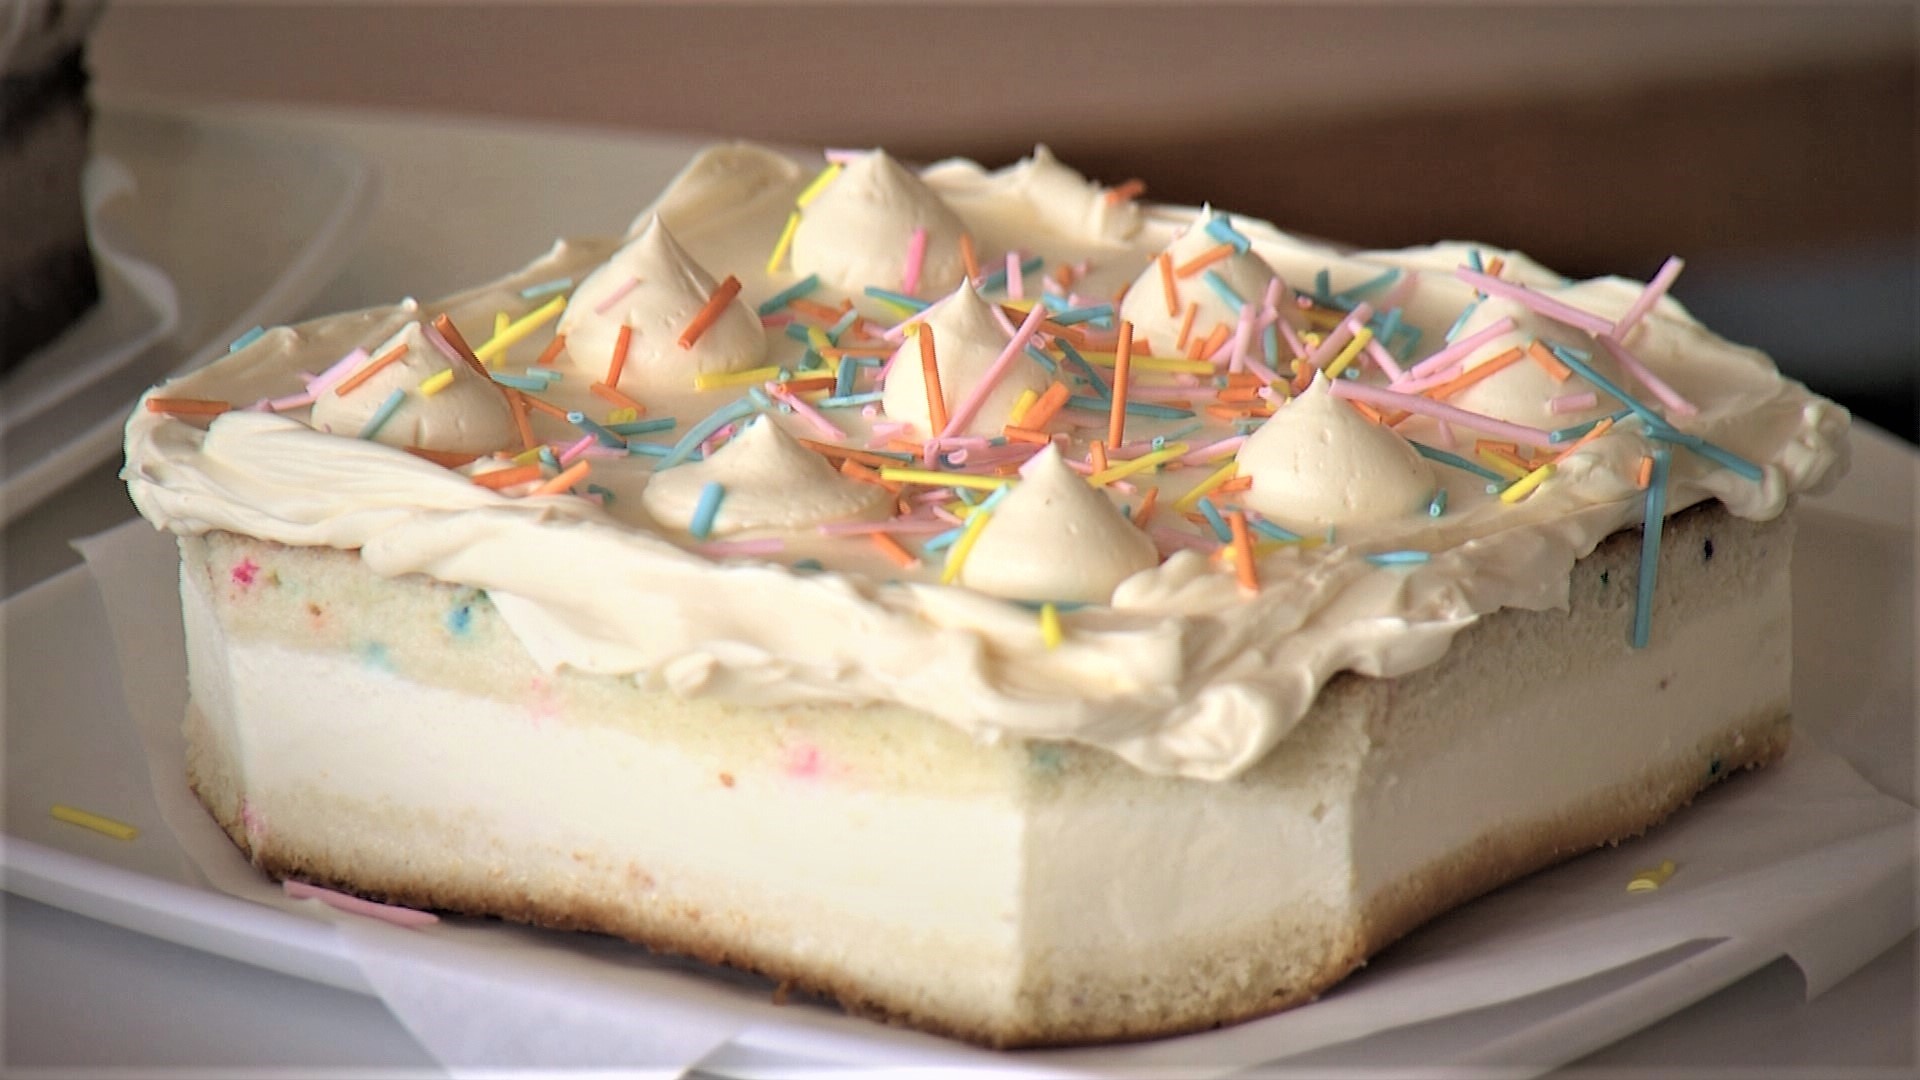 Icebox Ice Cream Cakes are sold online and at Molly Moon's ice cream shops